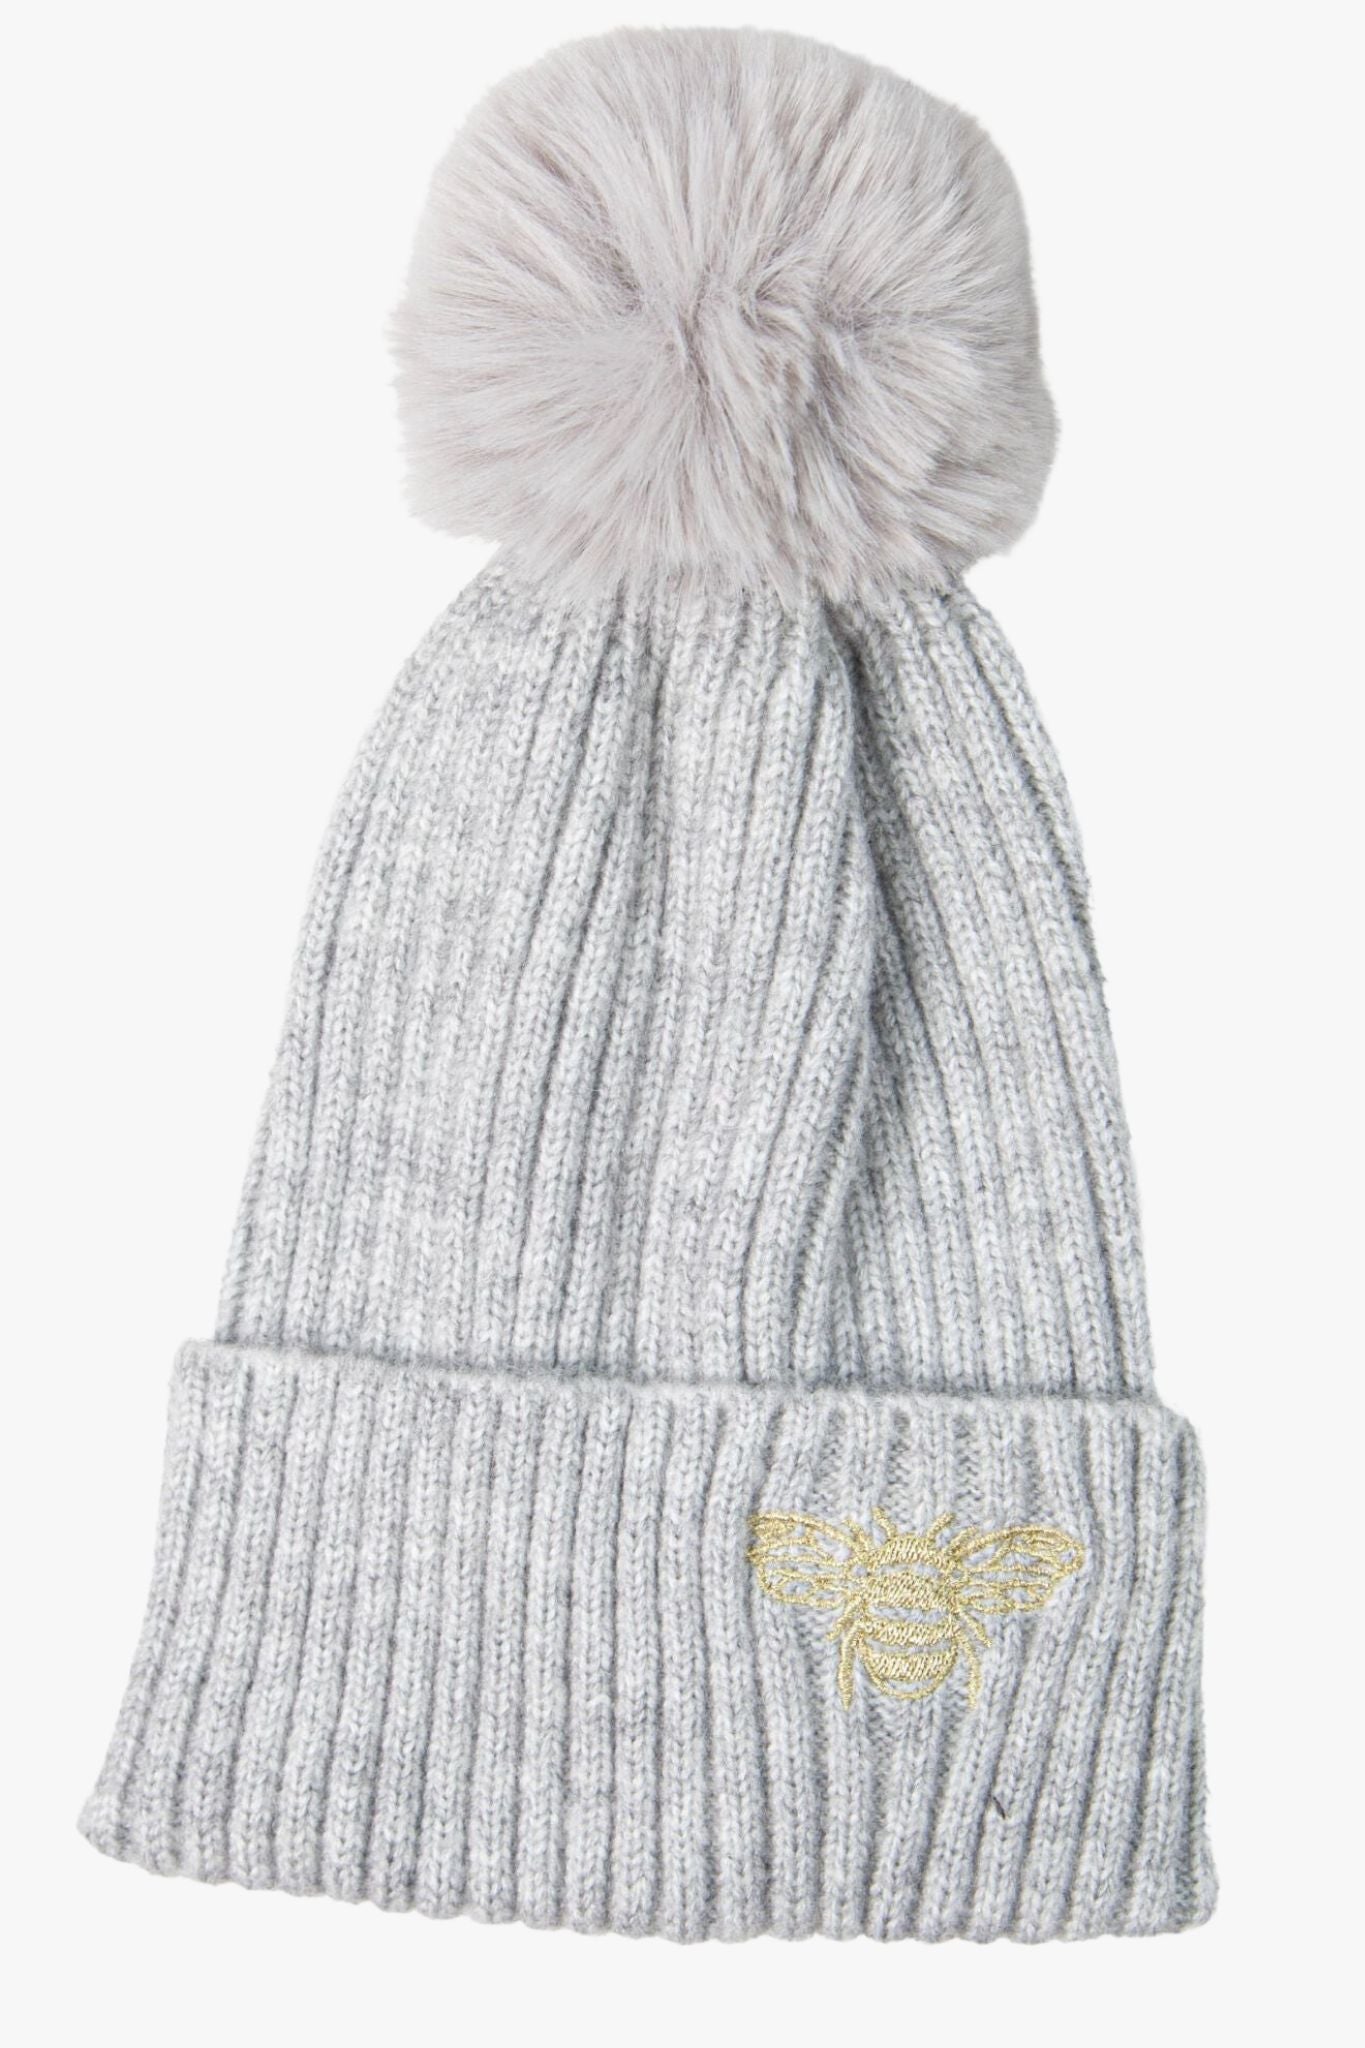 light grey winter bobble hat with a pom pom and an embroidered gold bee on the front